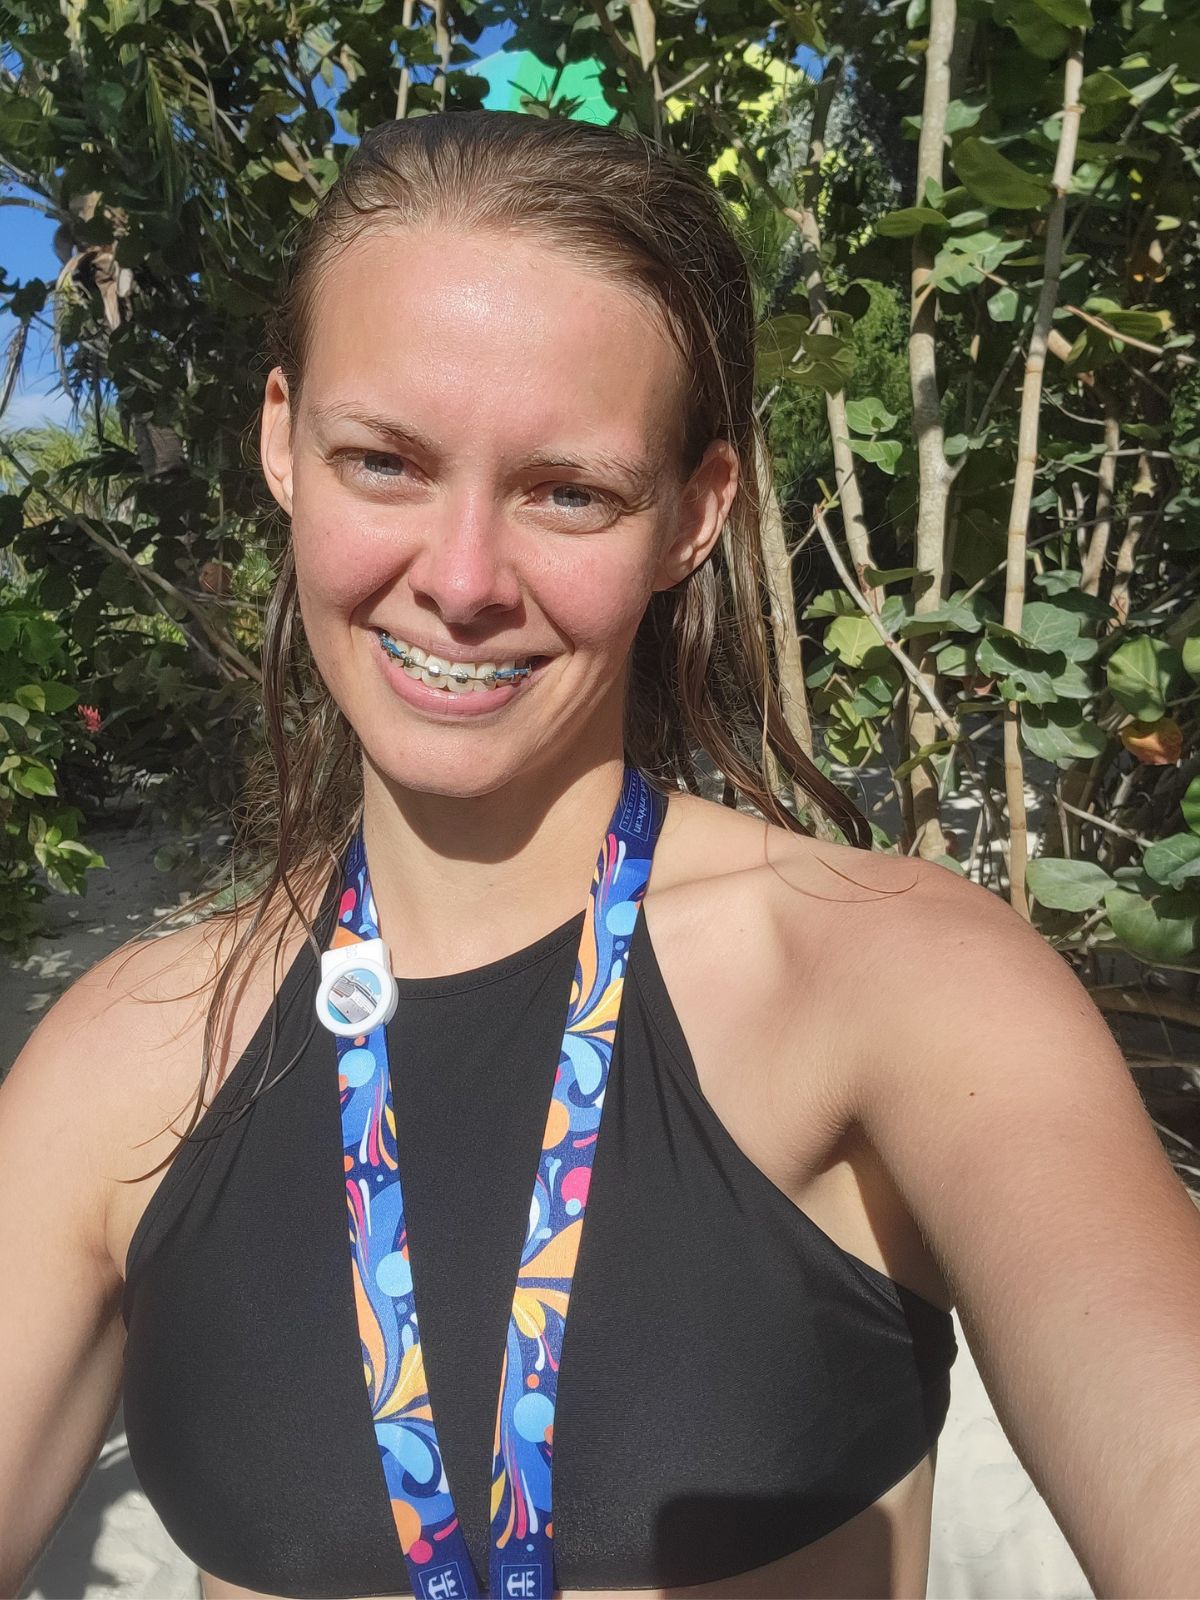 A blond girl is smiling at the camera wearing a black swim top and a lanyard around her neck. Her hair is damp and her face is red from the sun.